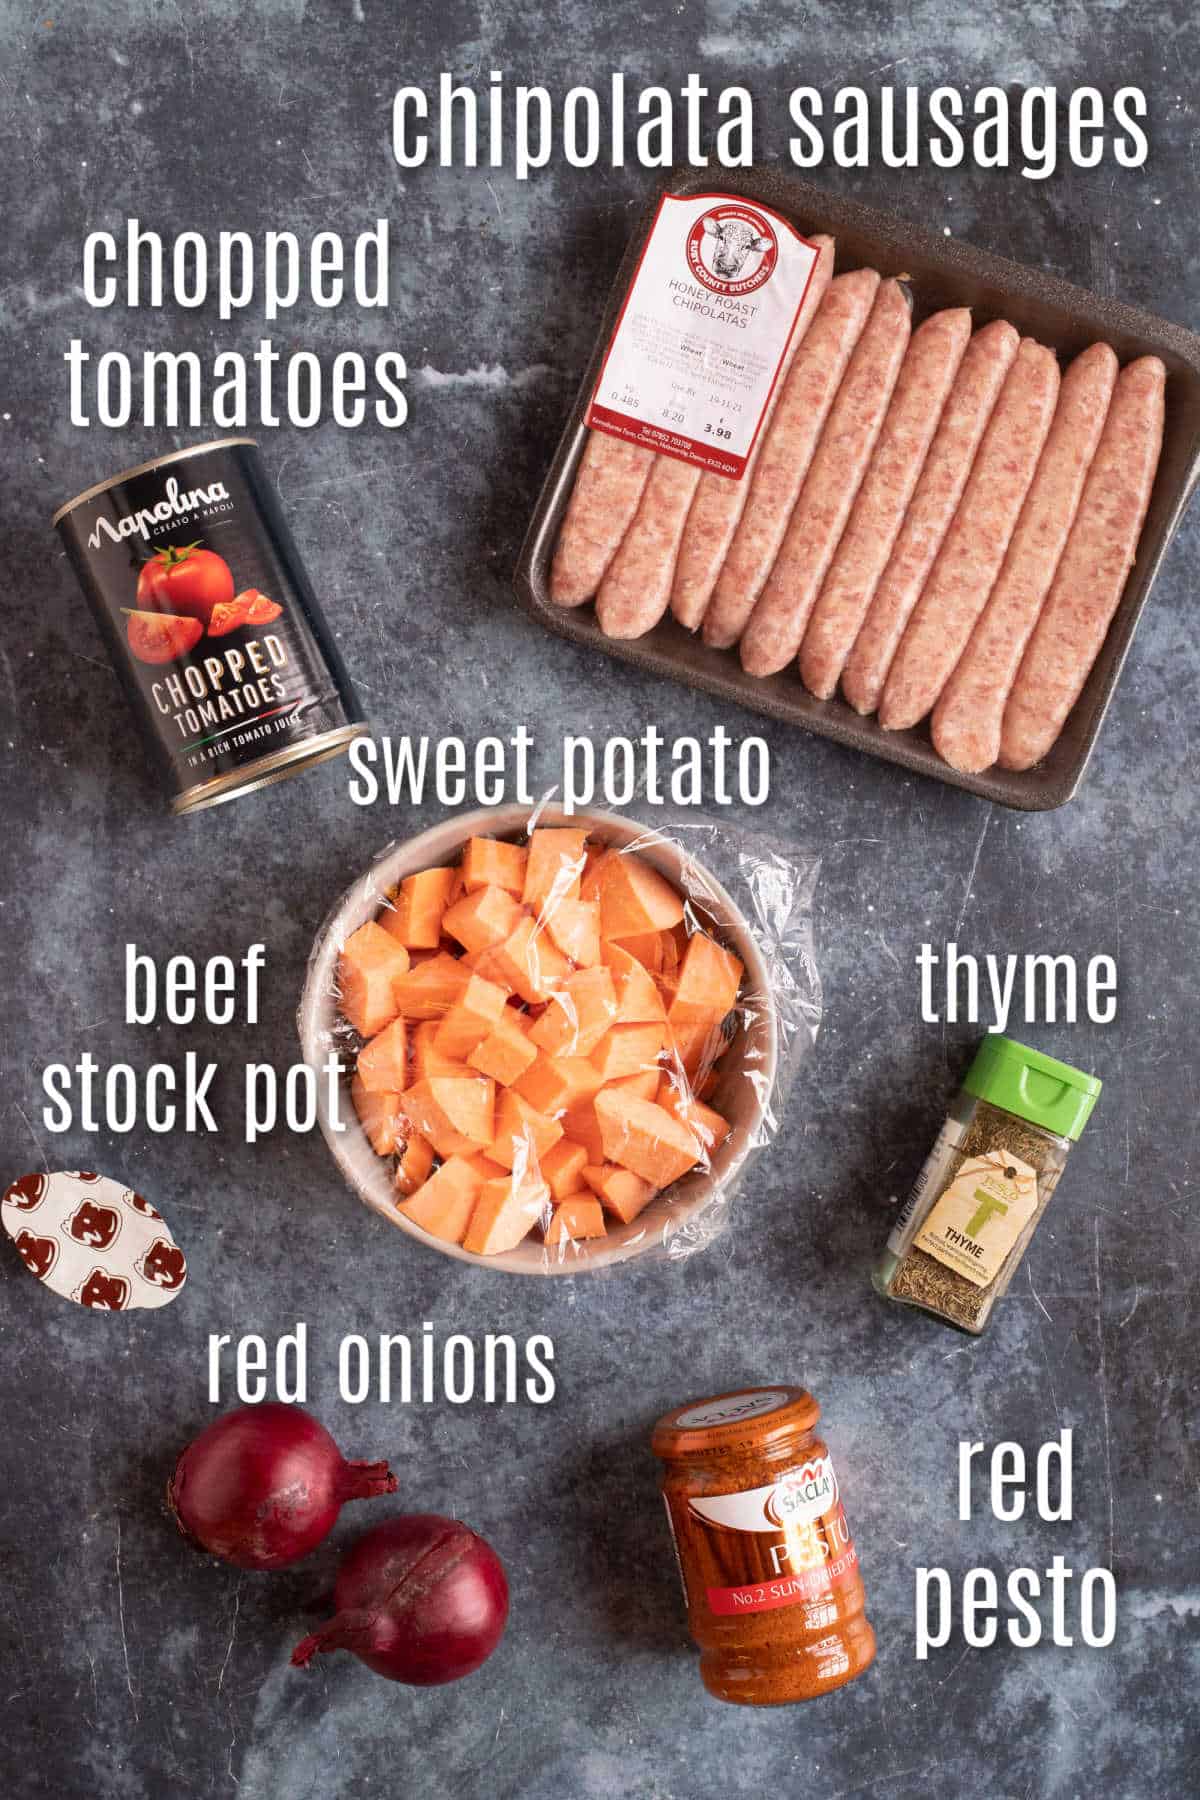 Ingredients for the slow cooker sausage casserole.